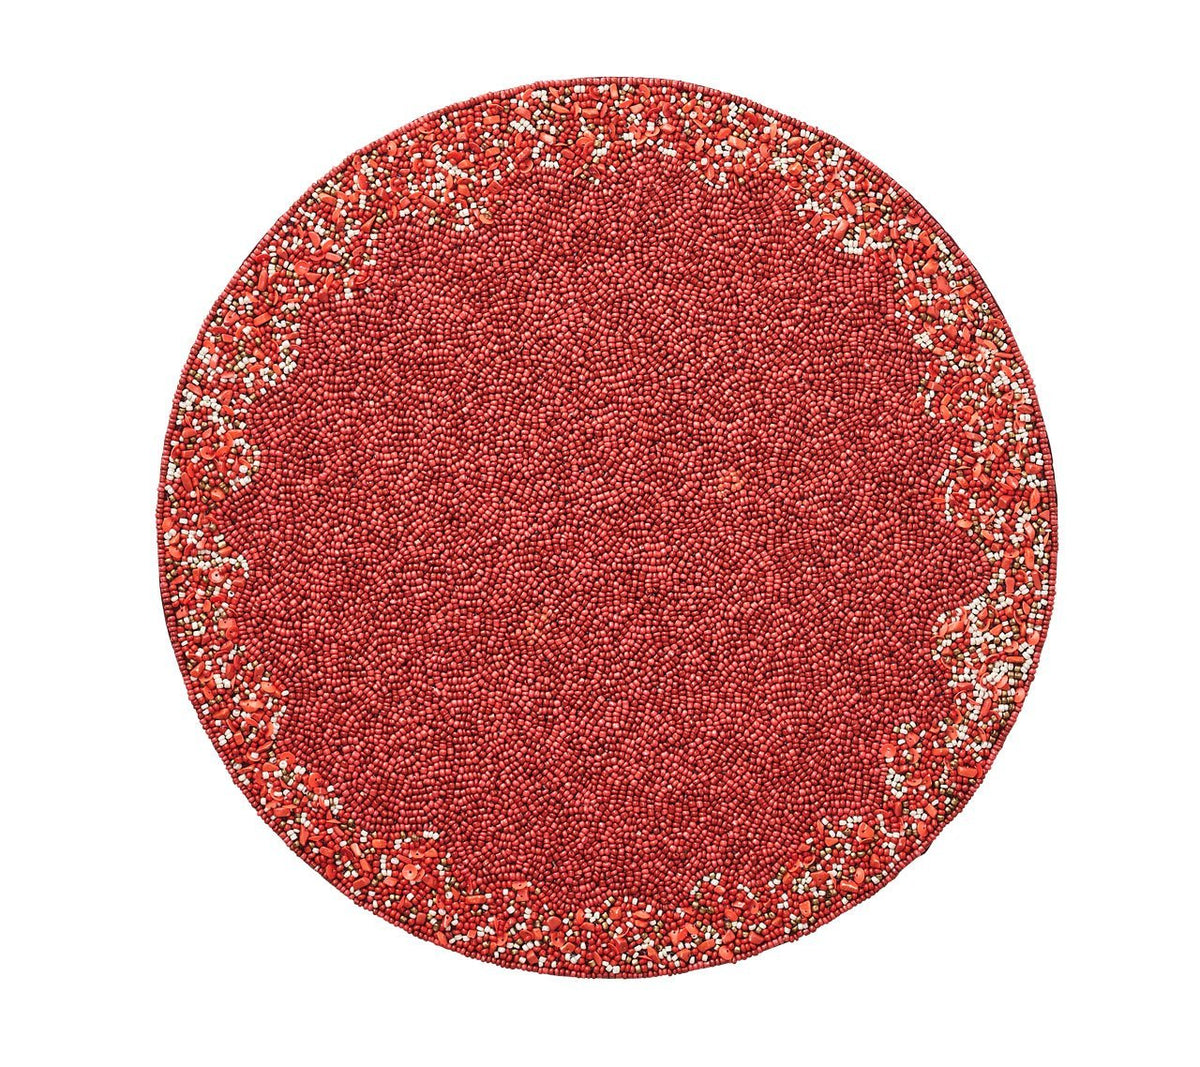 Kim Seybert Luxury Maui Placemat in Coral & Gold